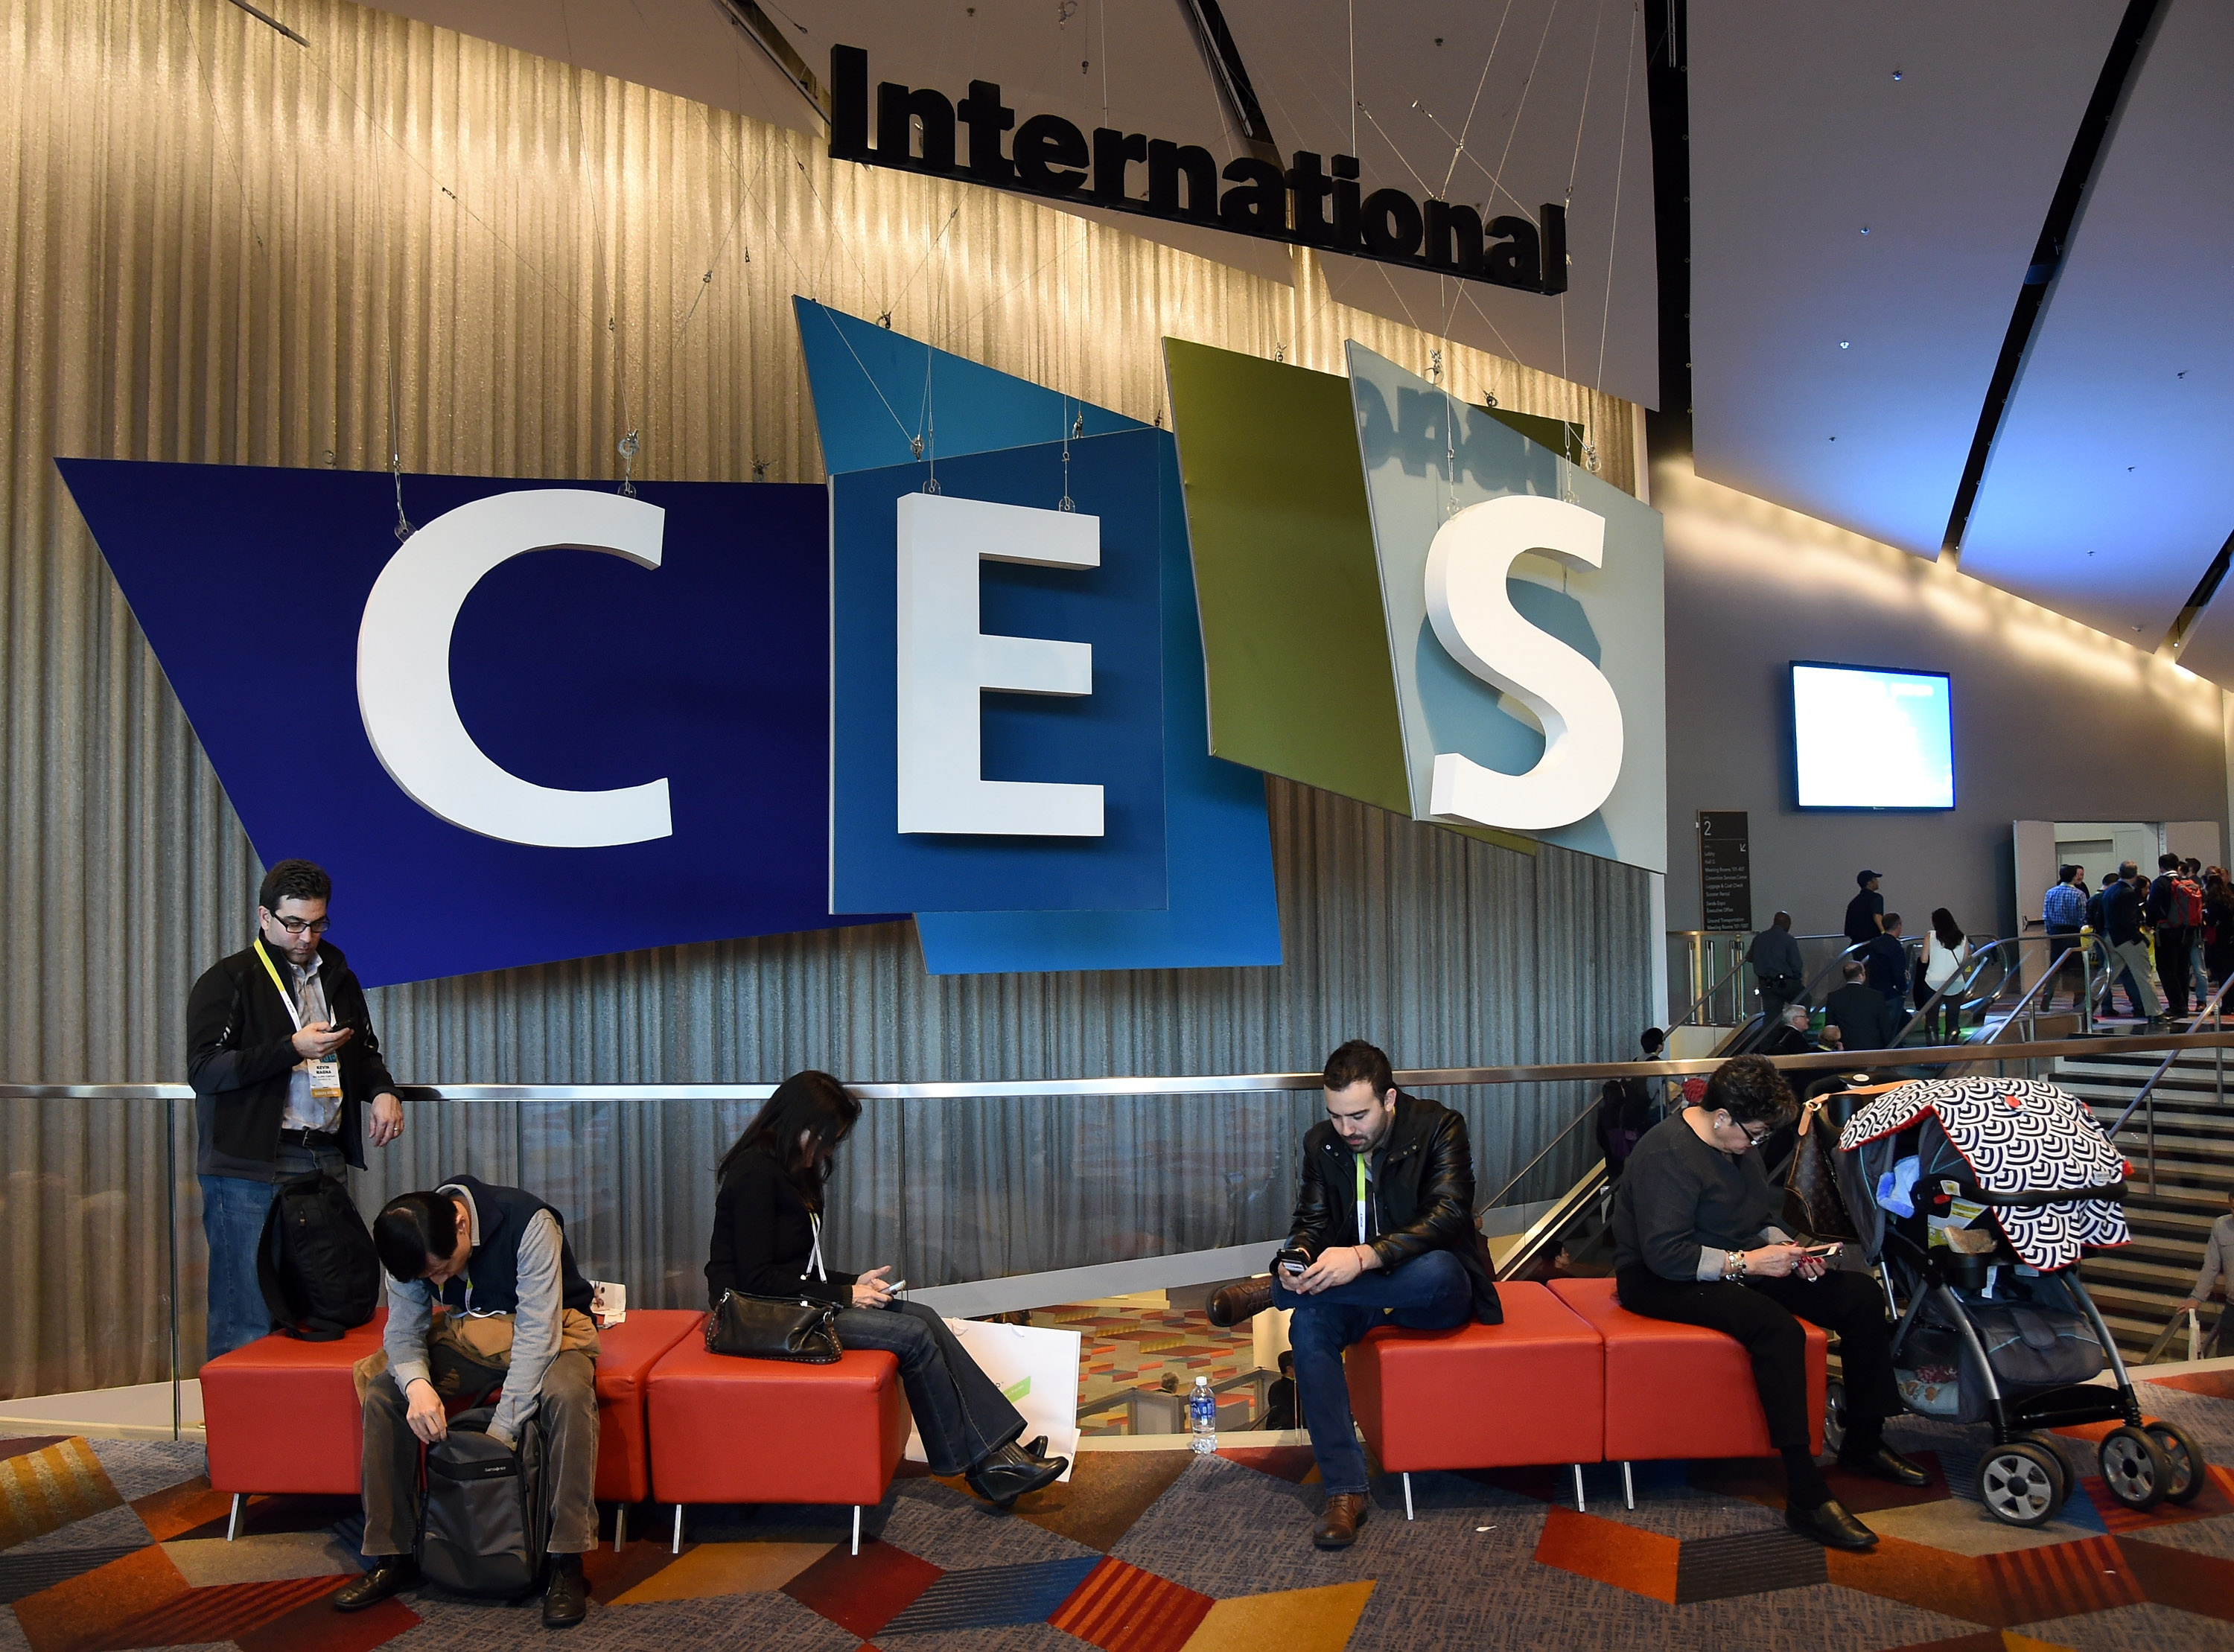 Attendees take a break at the 2015 International CES on Jan. 6, 2015 in Las Vegas, Nevada. (Ethan Miller—Getty Images)